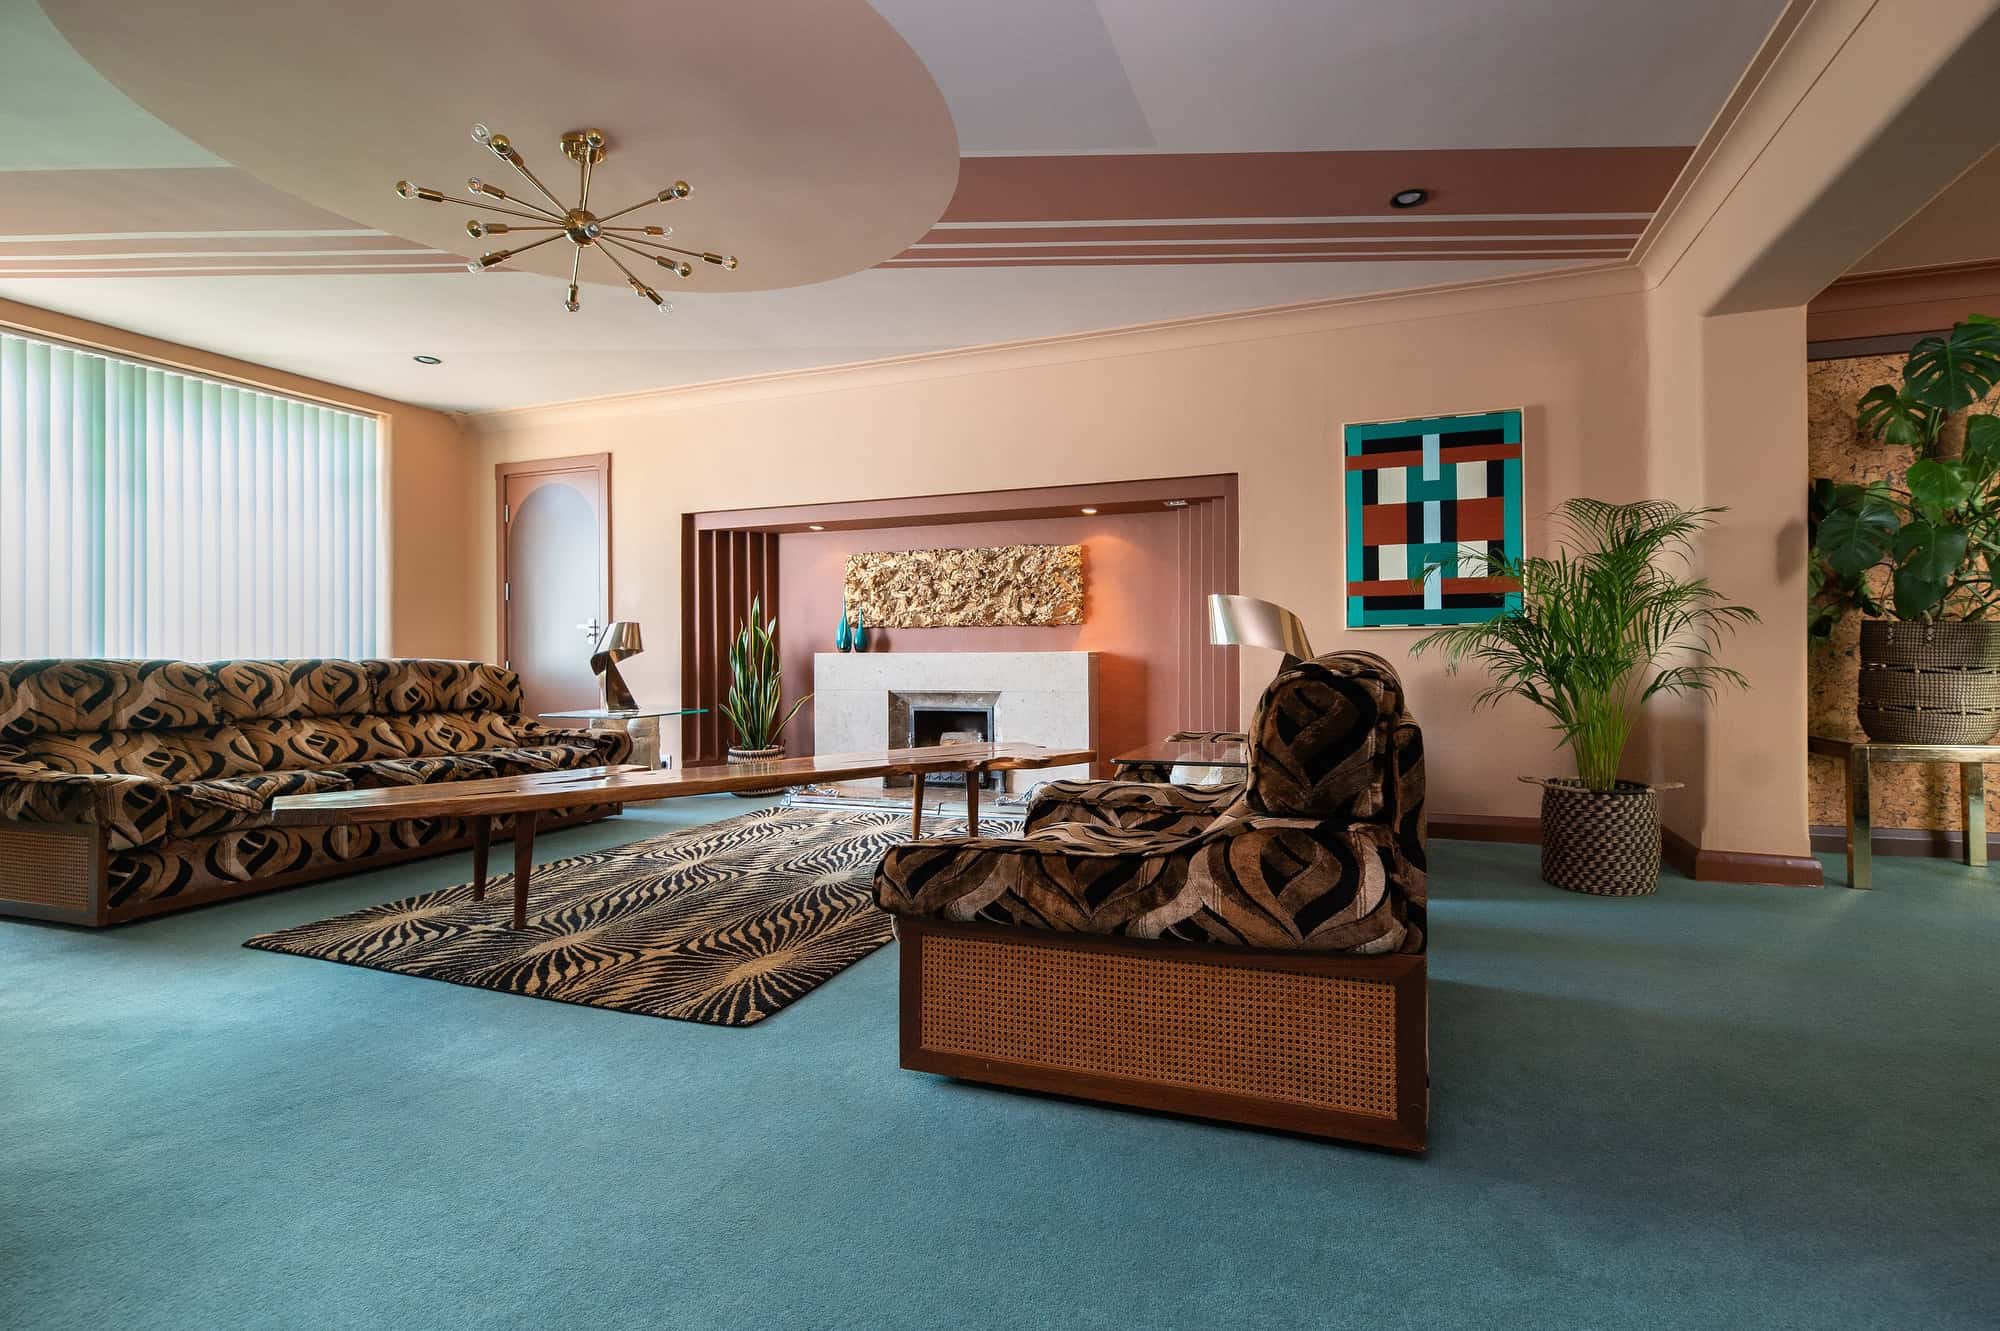 Sandy Shore CT10 - A beautifully crafted Art Deco home styled and furnished with mid-century art and furnishings. This property also has the option of shoot and stay - The Location Guys